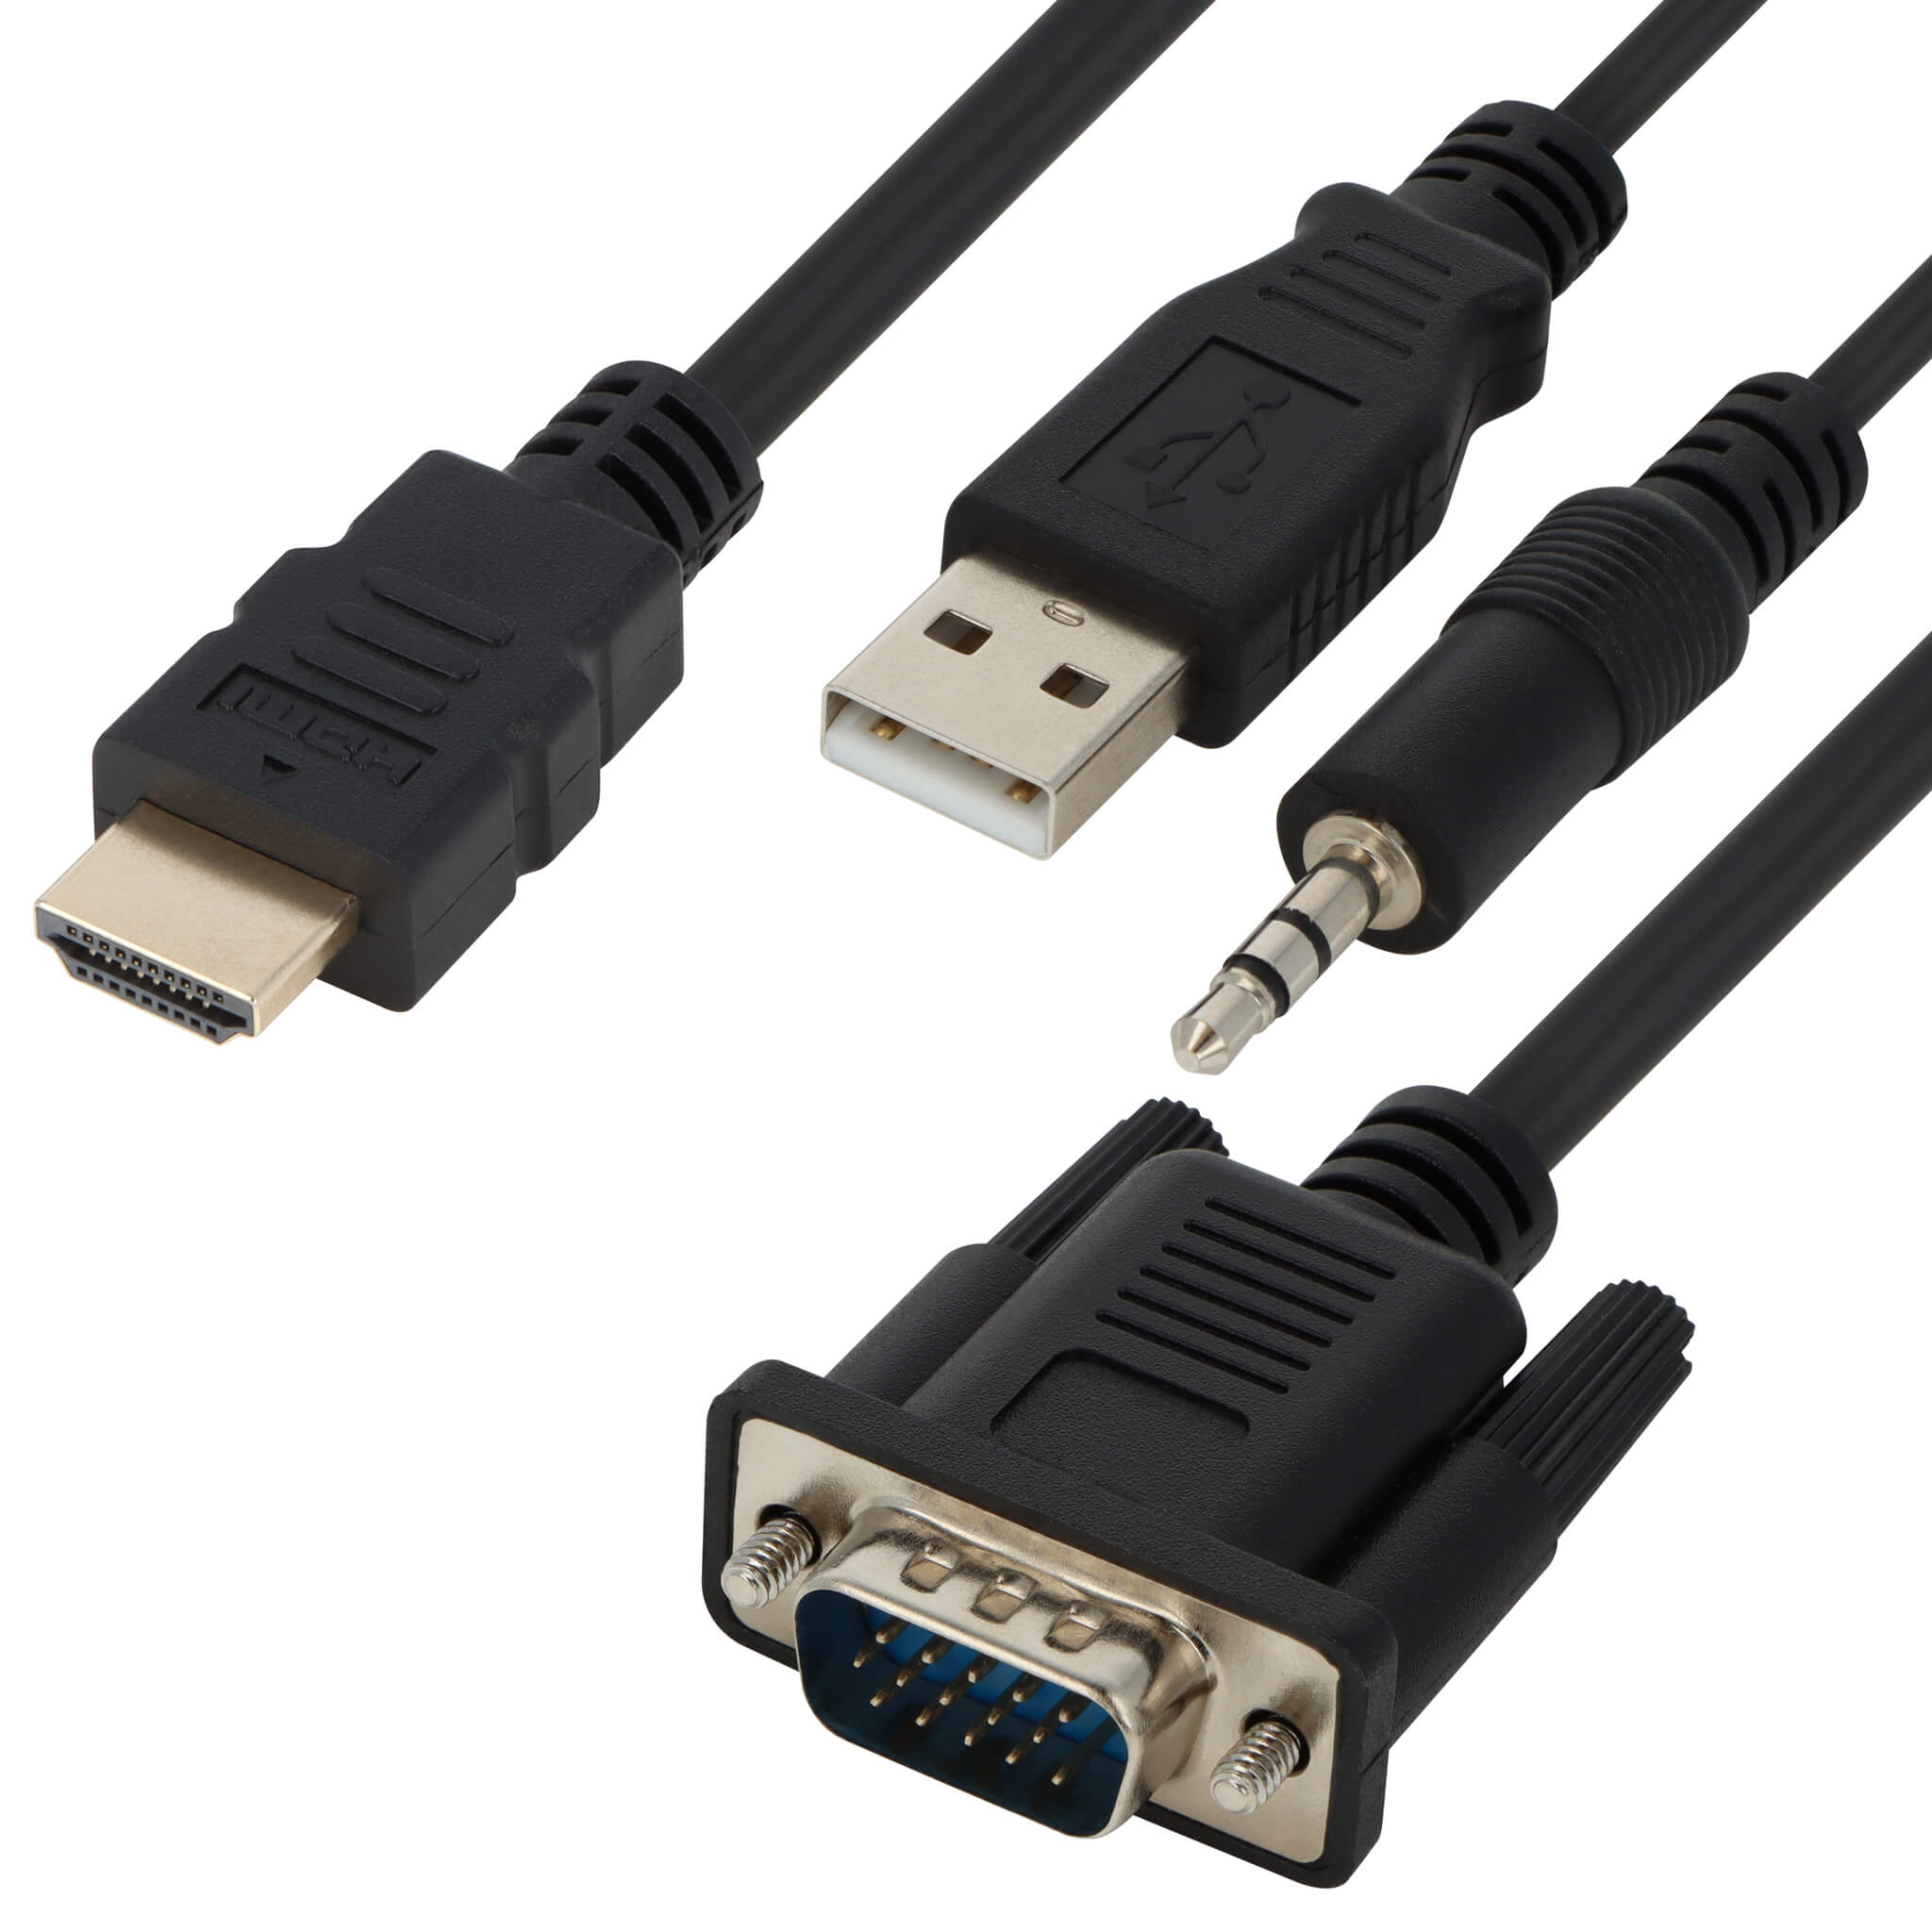 VisionTek VGA to HDMI Active Adapter w/ Audio, 5 Feet, Male to Male, for  Computer, Desktop, Laptop, PC, Monitor, Projector, HDTV, and more (900824)